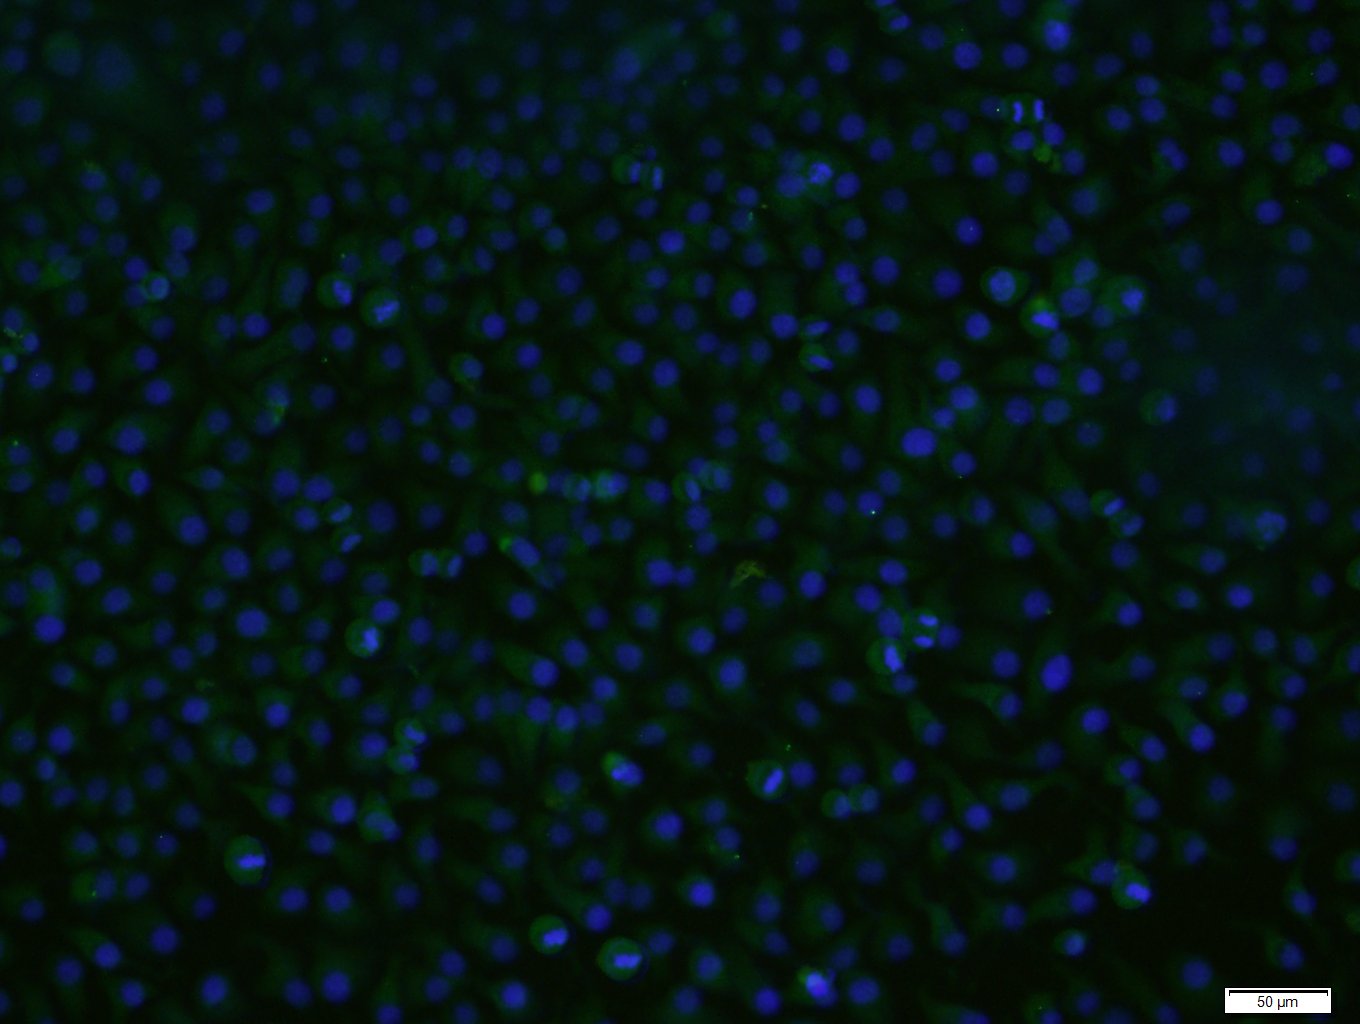 HepG2 cells were stained with Caspase 9 Polyclonal Antibody, Unconjugated (bs-0049R) at 1:200 in PBS and incubated for two hours at 37\u00b0C followed by Goat Anti-Rabbit IgG (H+L), FITC conjugated secondary antibody. DAPI staining of the nucleus in blue. 